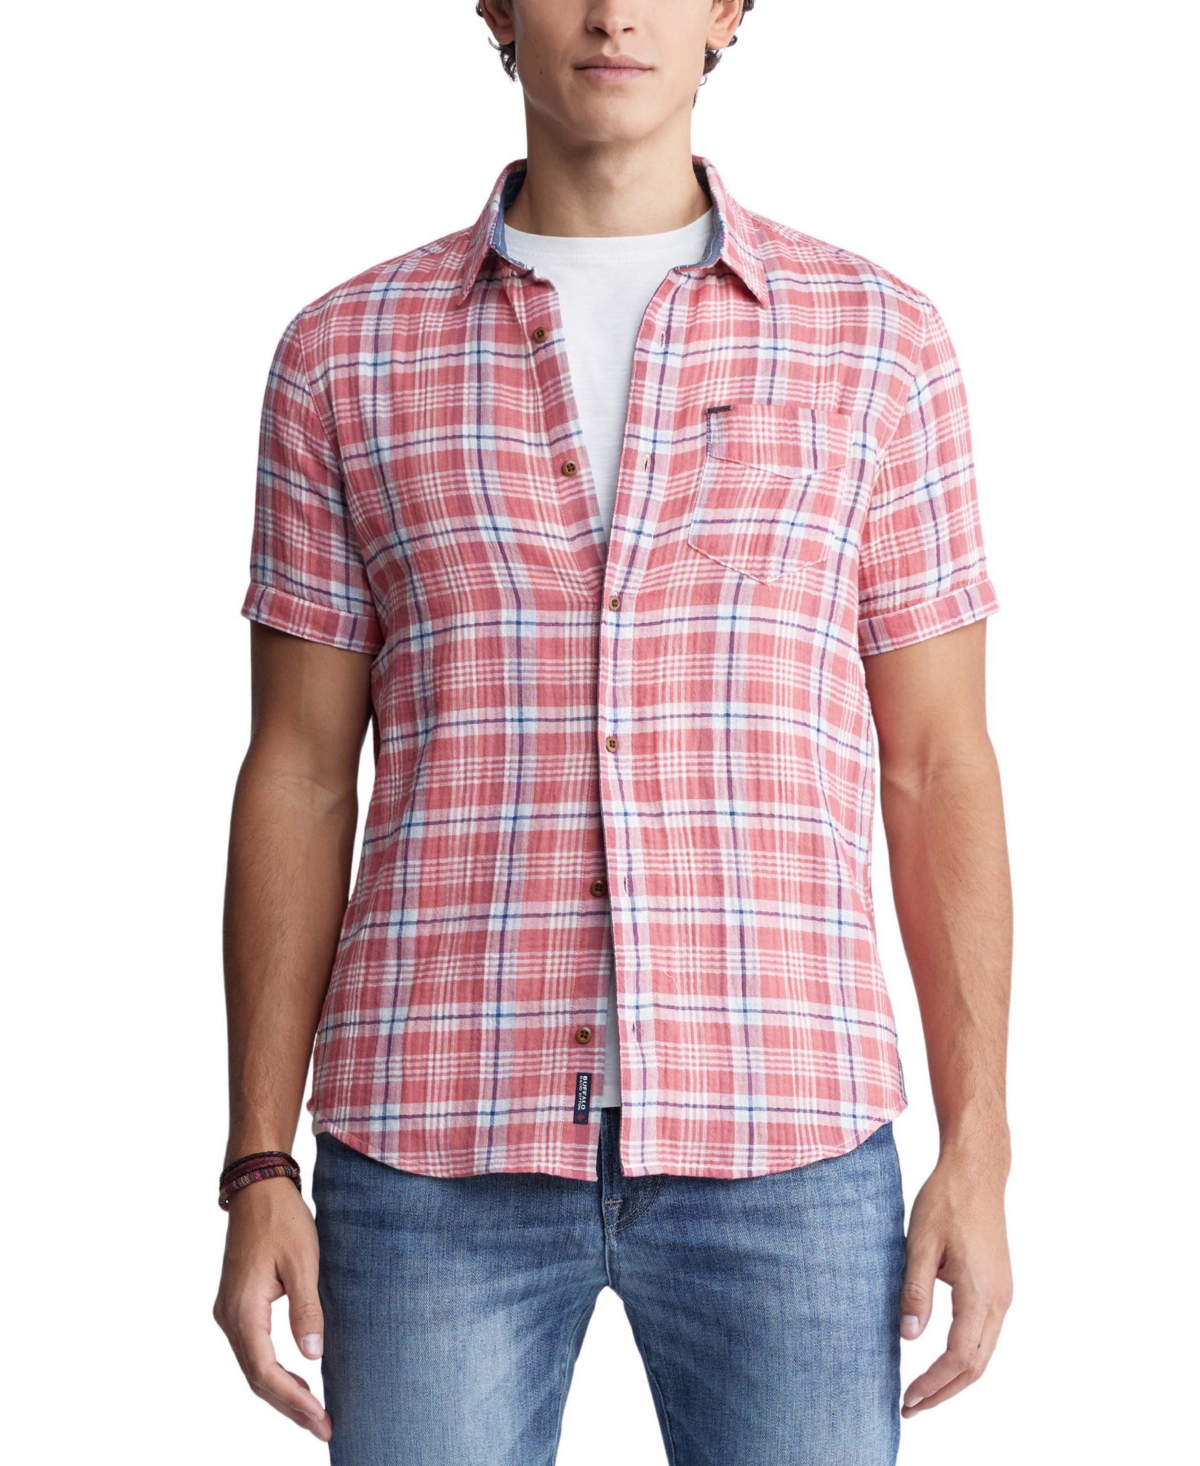 Men's Sirilo Plaid Short Sleeve Button-Front Shirt - Mineral Red